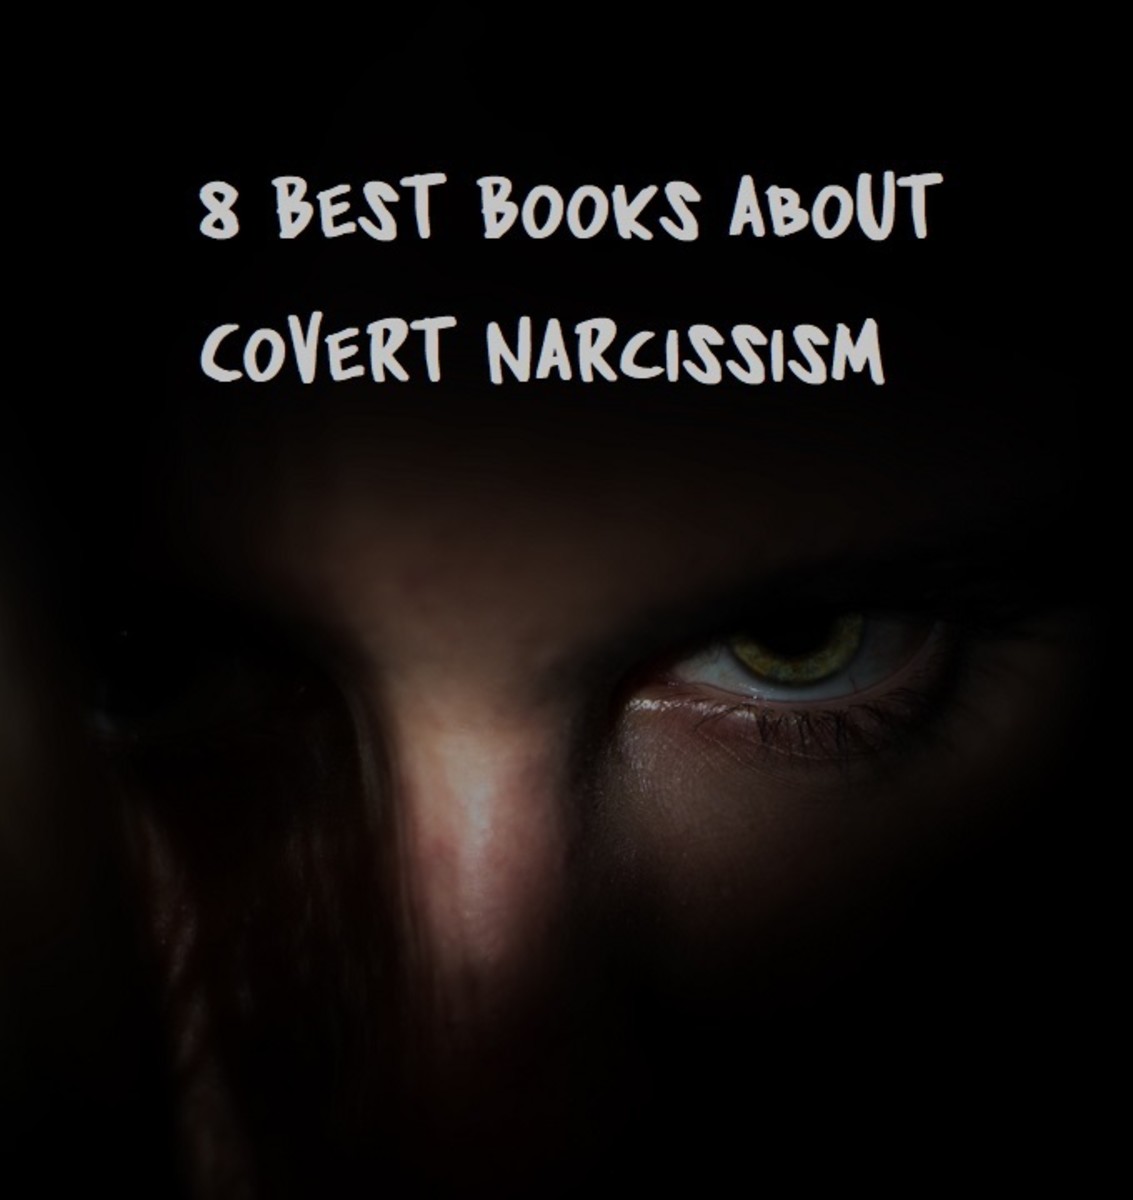 8 Best Books about Covert Narcissism